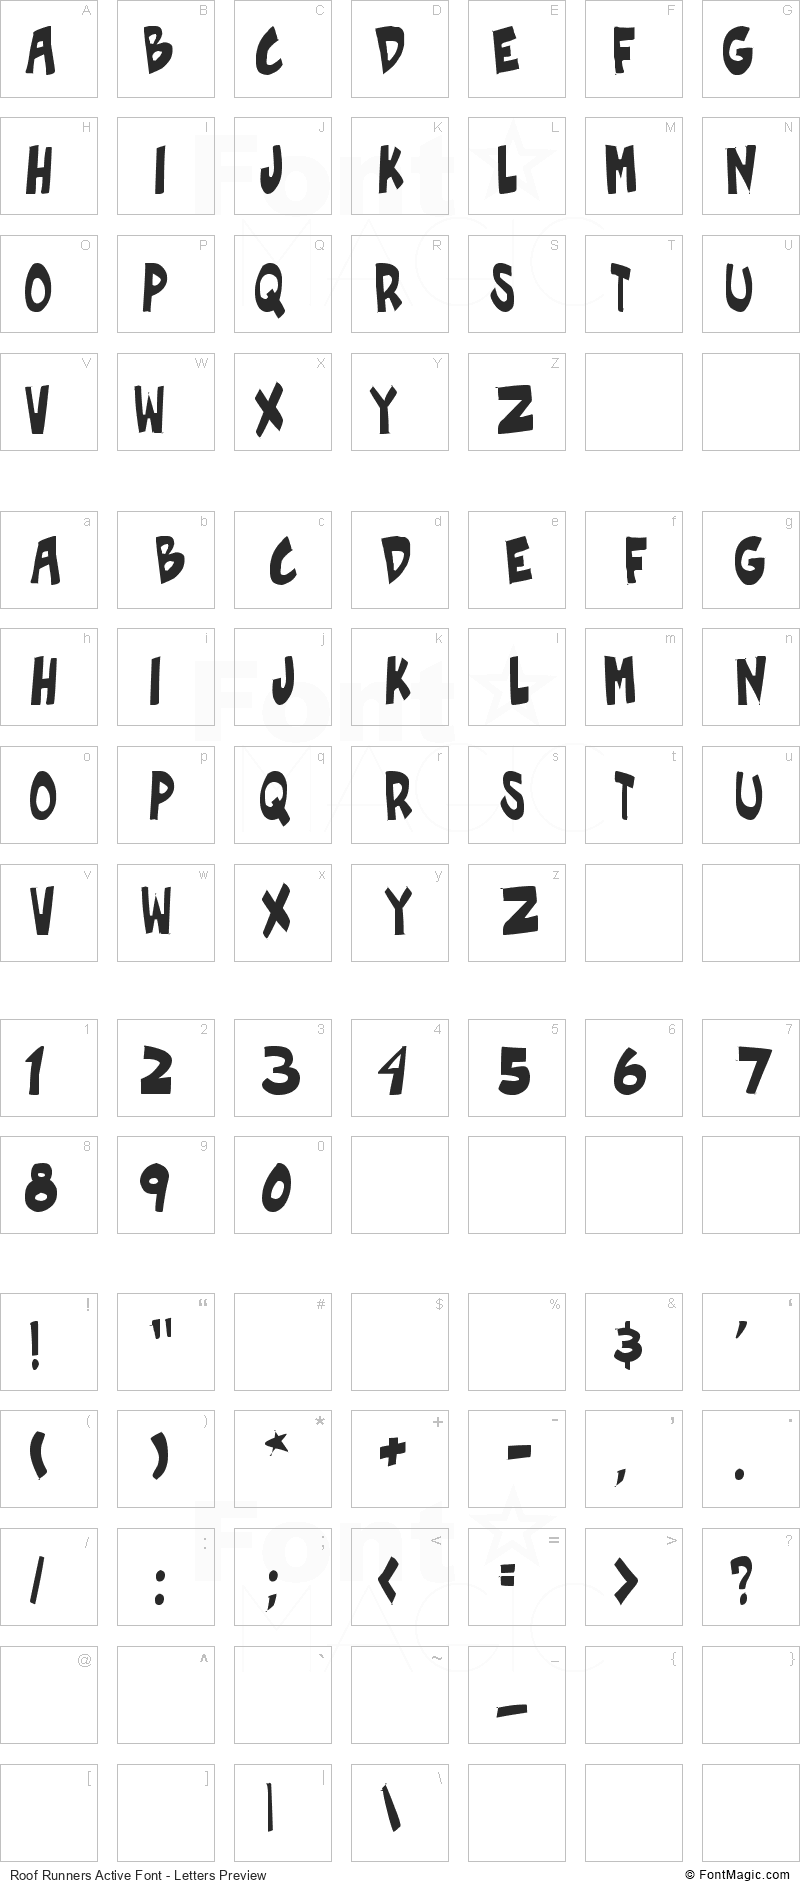 Roof Runners Active Font - All Latters Preview Chart